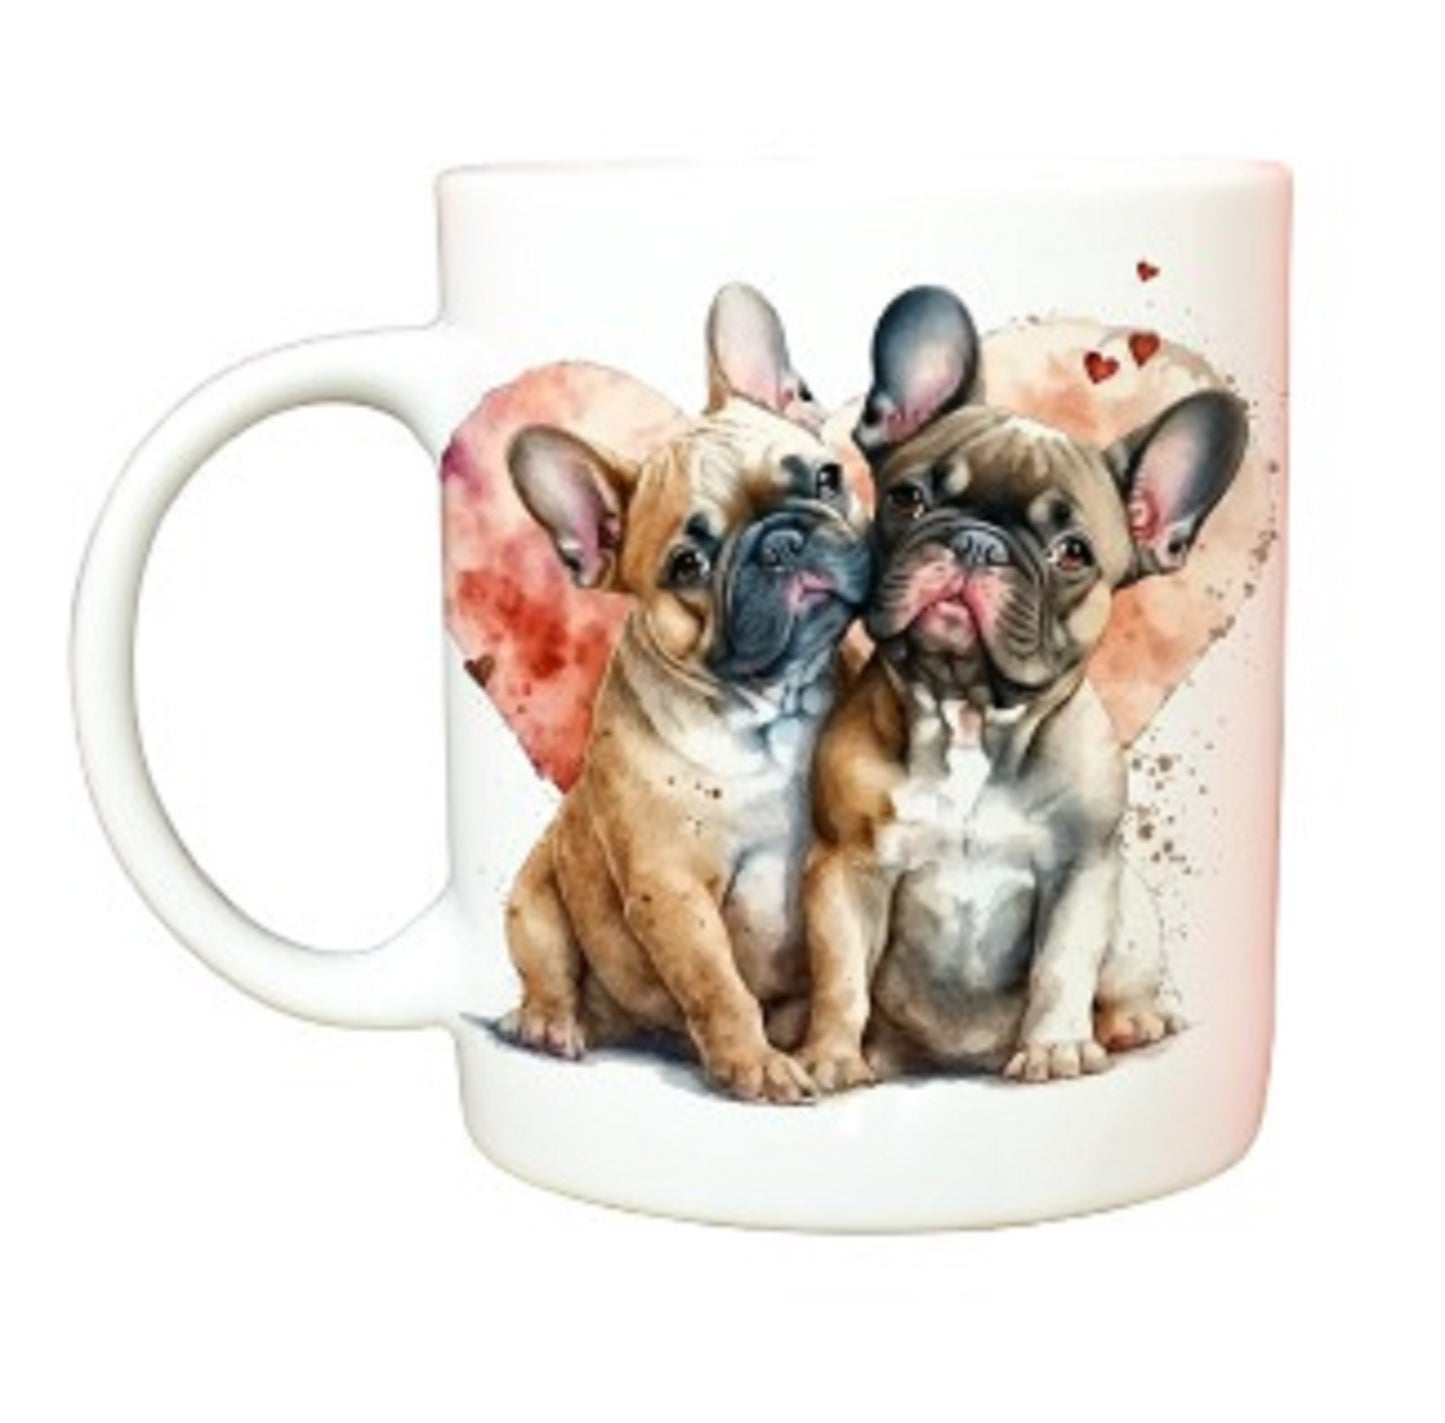  Three Different Styles of French Bulldog Mug by Free Spirit Accessories sold by Free Spirit Accessories